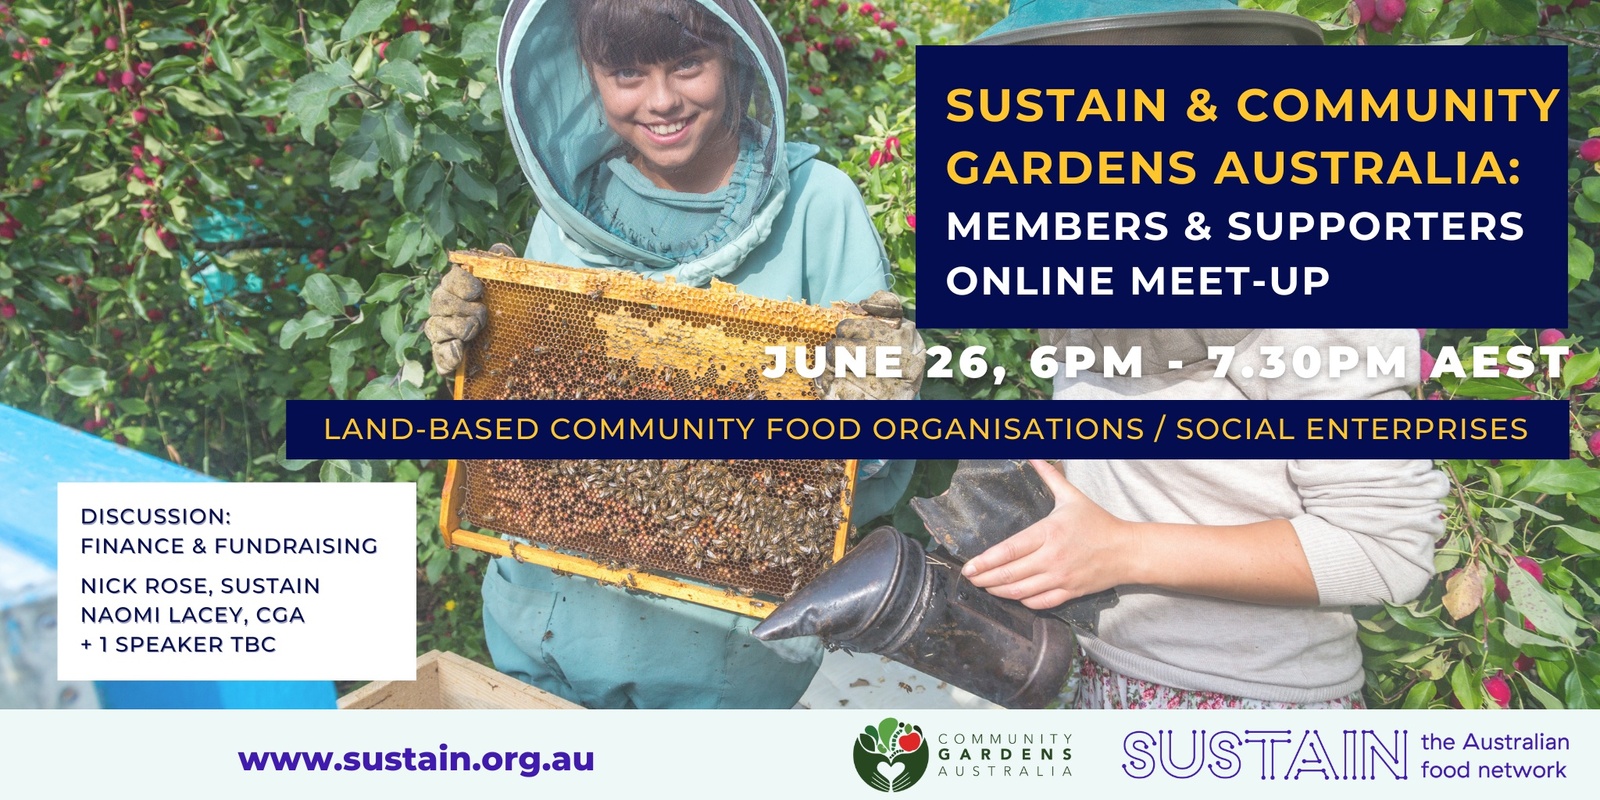 Banner image for Land-based community food organisations - Sustain / CGA members & supporters meet-up